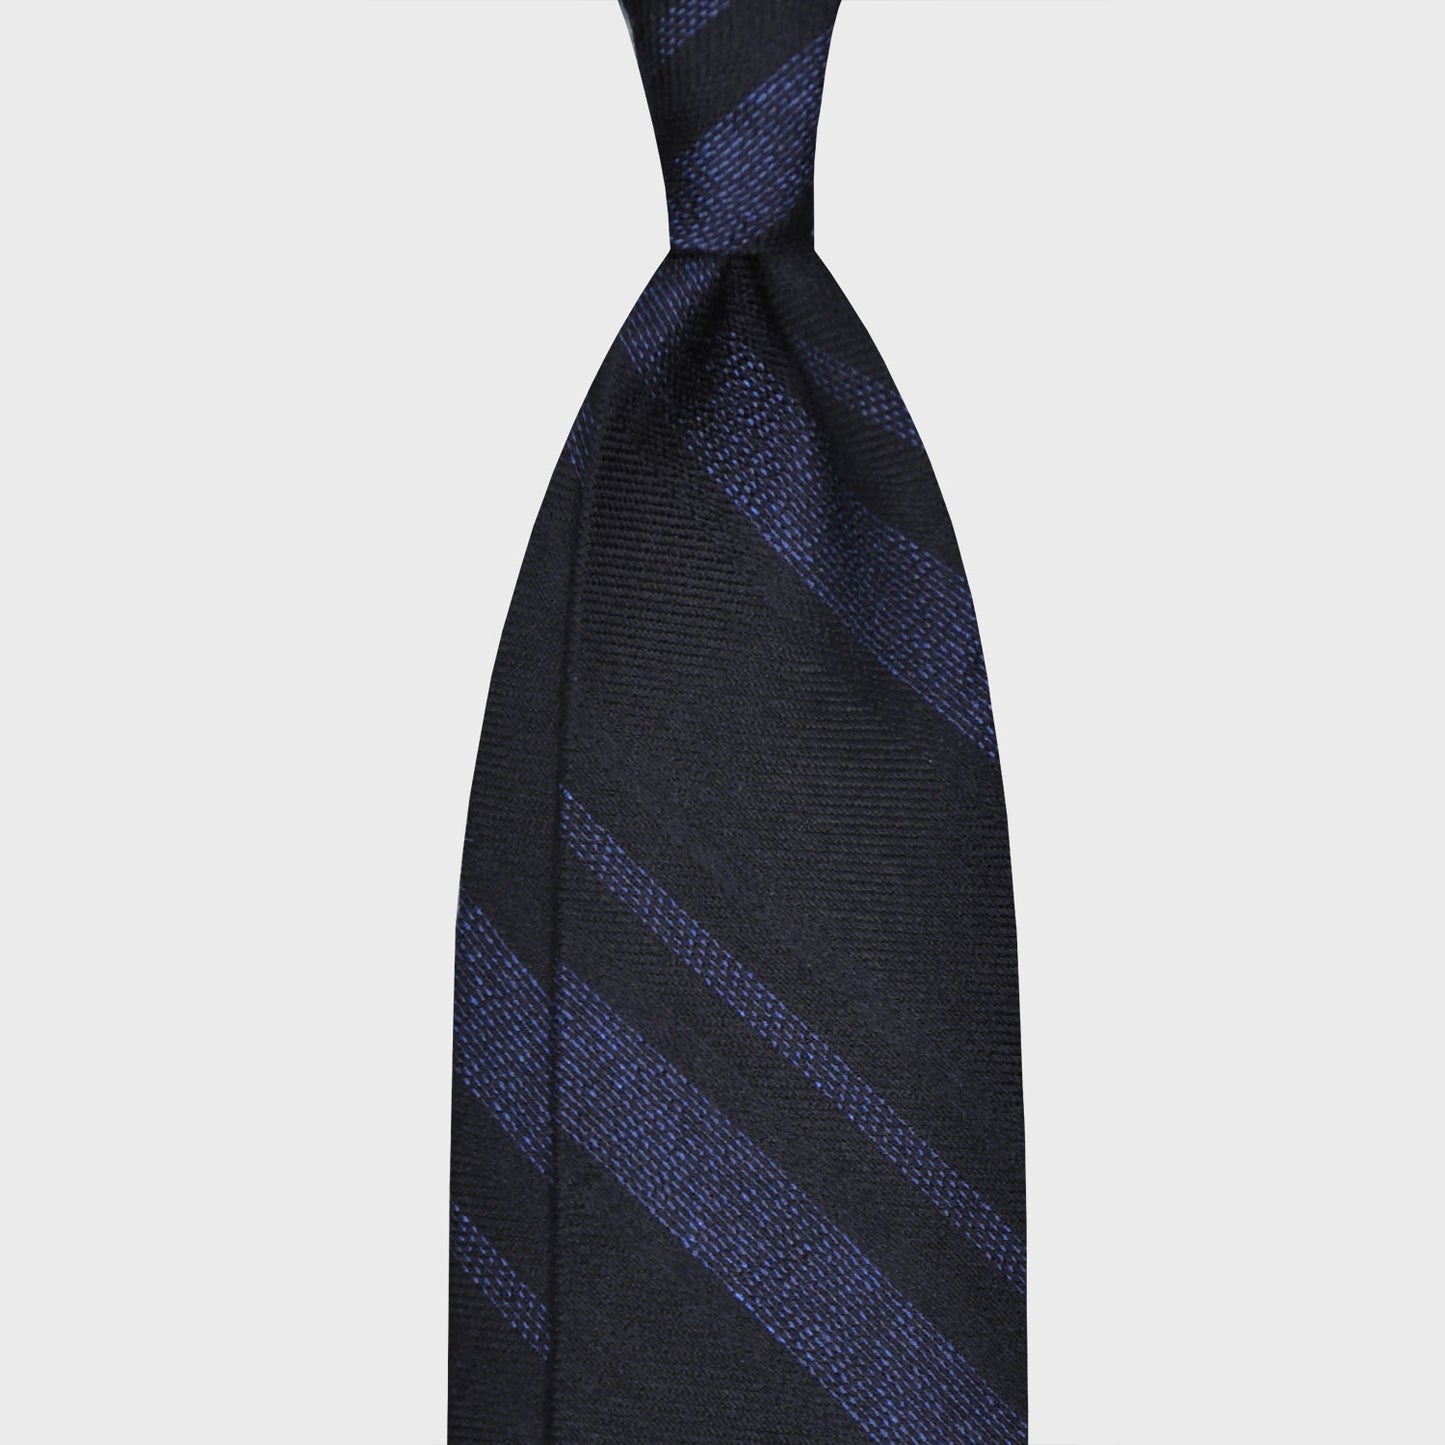 Load image into Gallery viewer, Navy Blue Silk Wool Striped Tie. Elegant regimental necktie made with silk and wool, hand rolled edge, unlined 3 folds, navy blue background with denim blue striped, F.Marino Napoli ties exclusive for Wools Boutique Uomo
